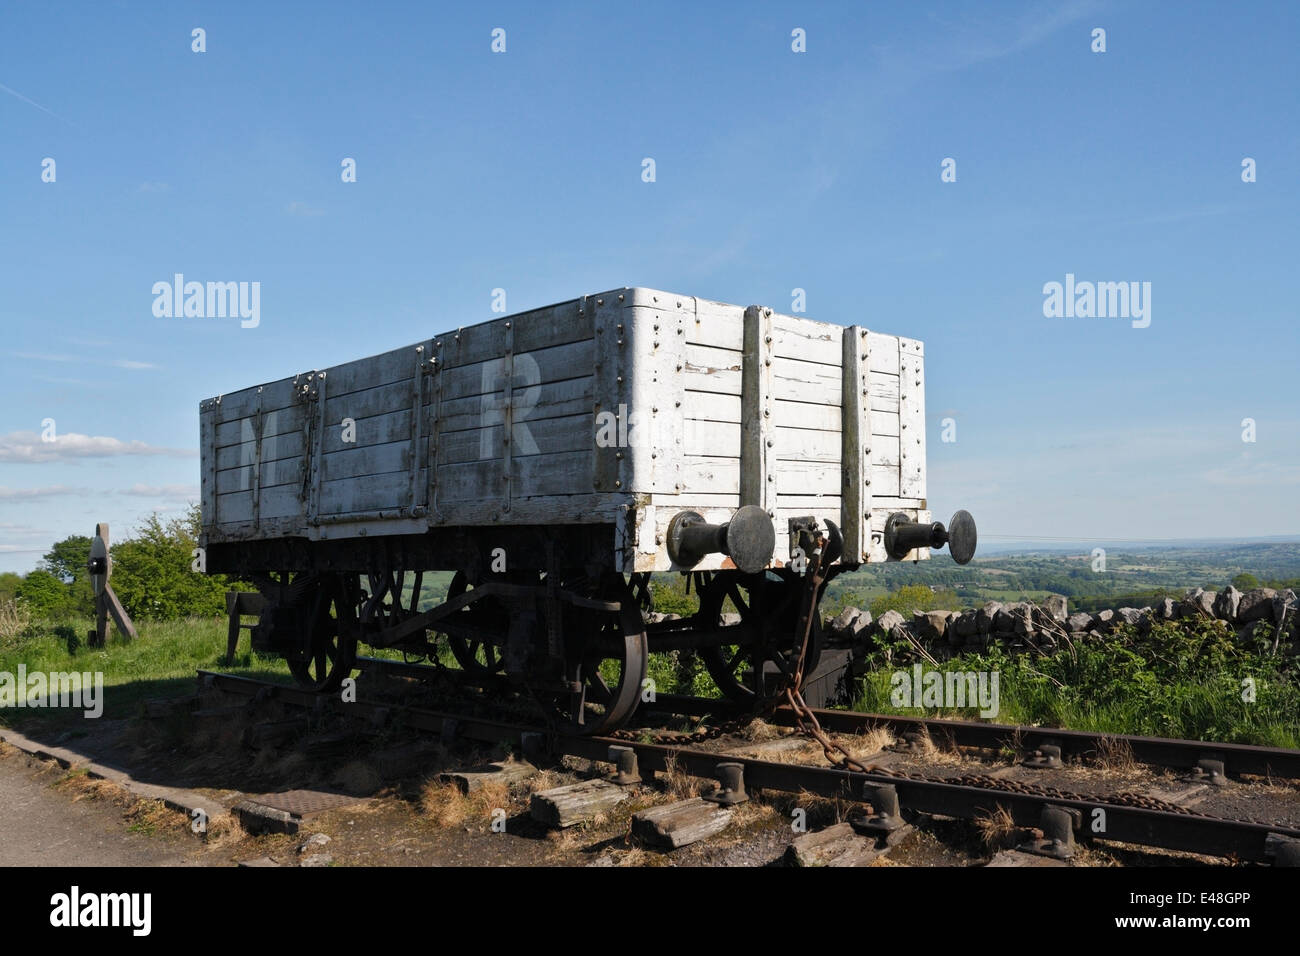 Freight Wagon at Middleton Top Incline on the High Peak Trail, Derbyshire England, Preserved industrial heritage Stock Photo